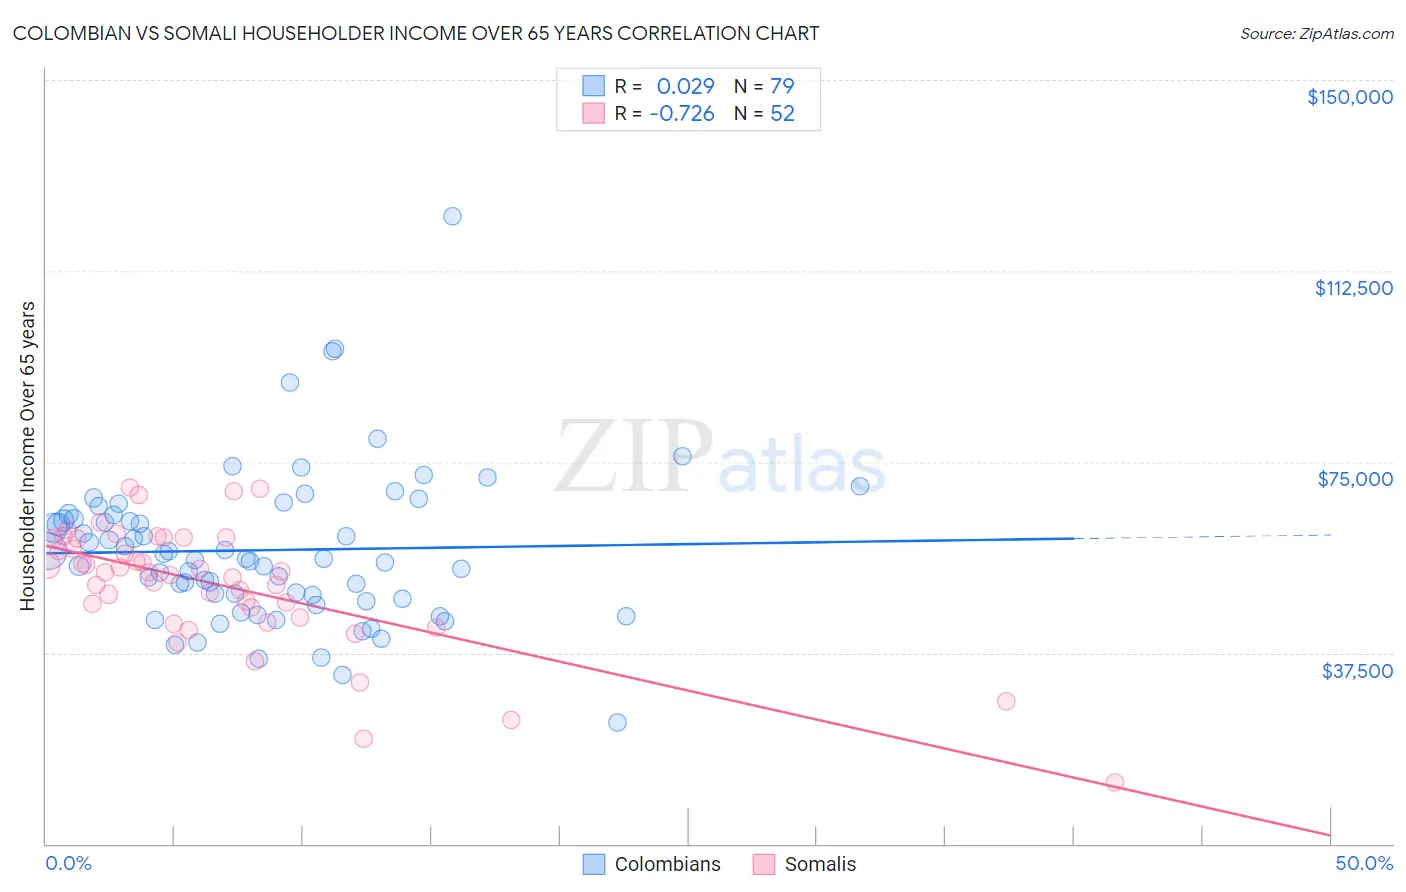 Colombian vs Somali Householder Income Over 65 years